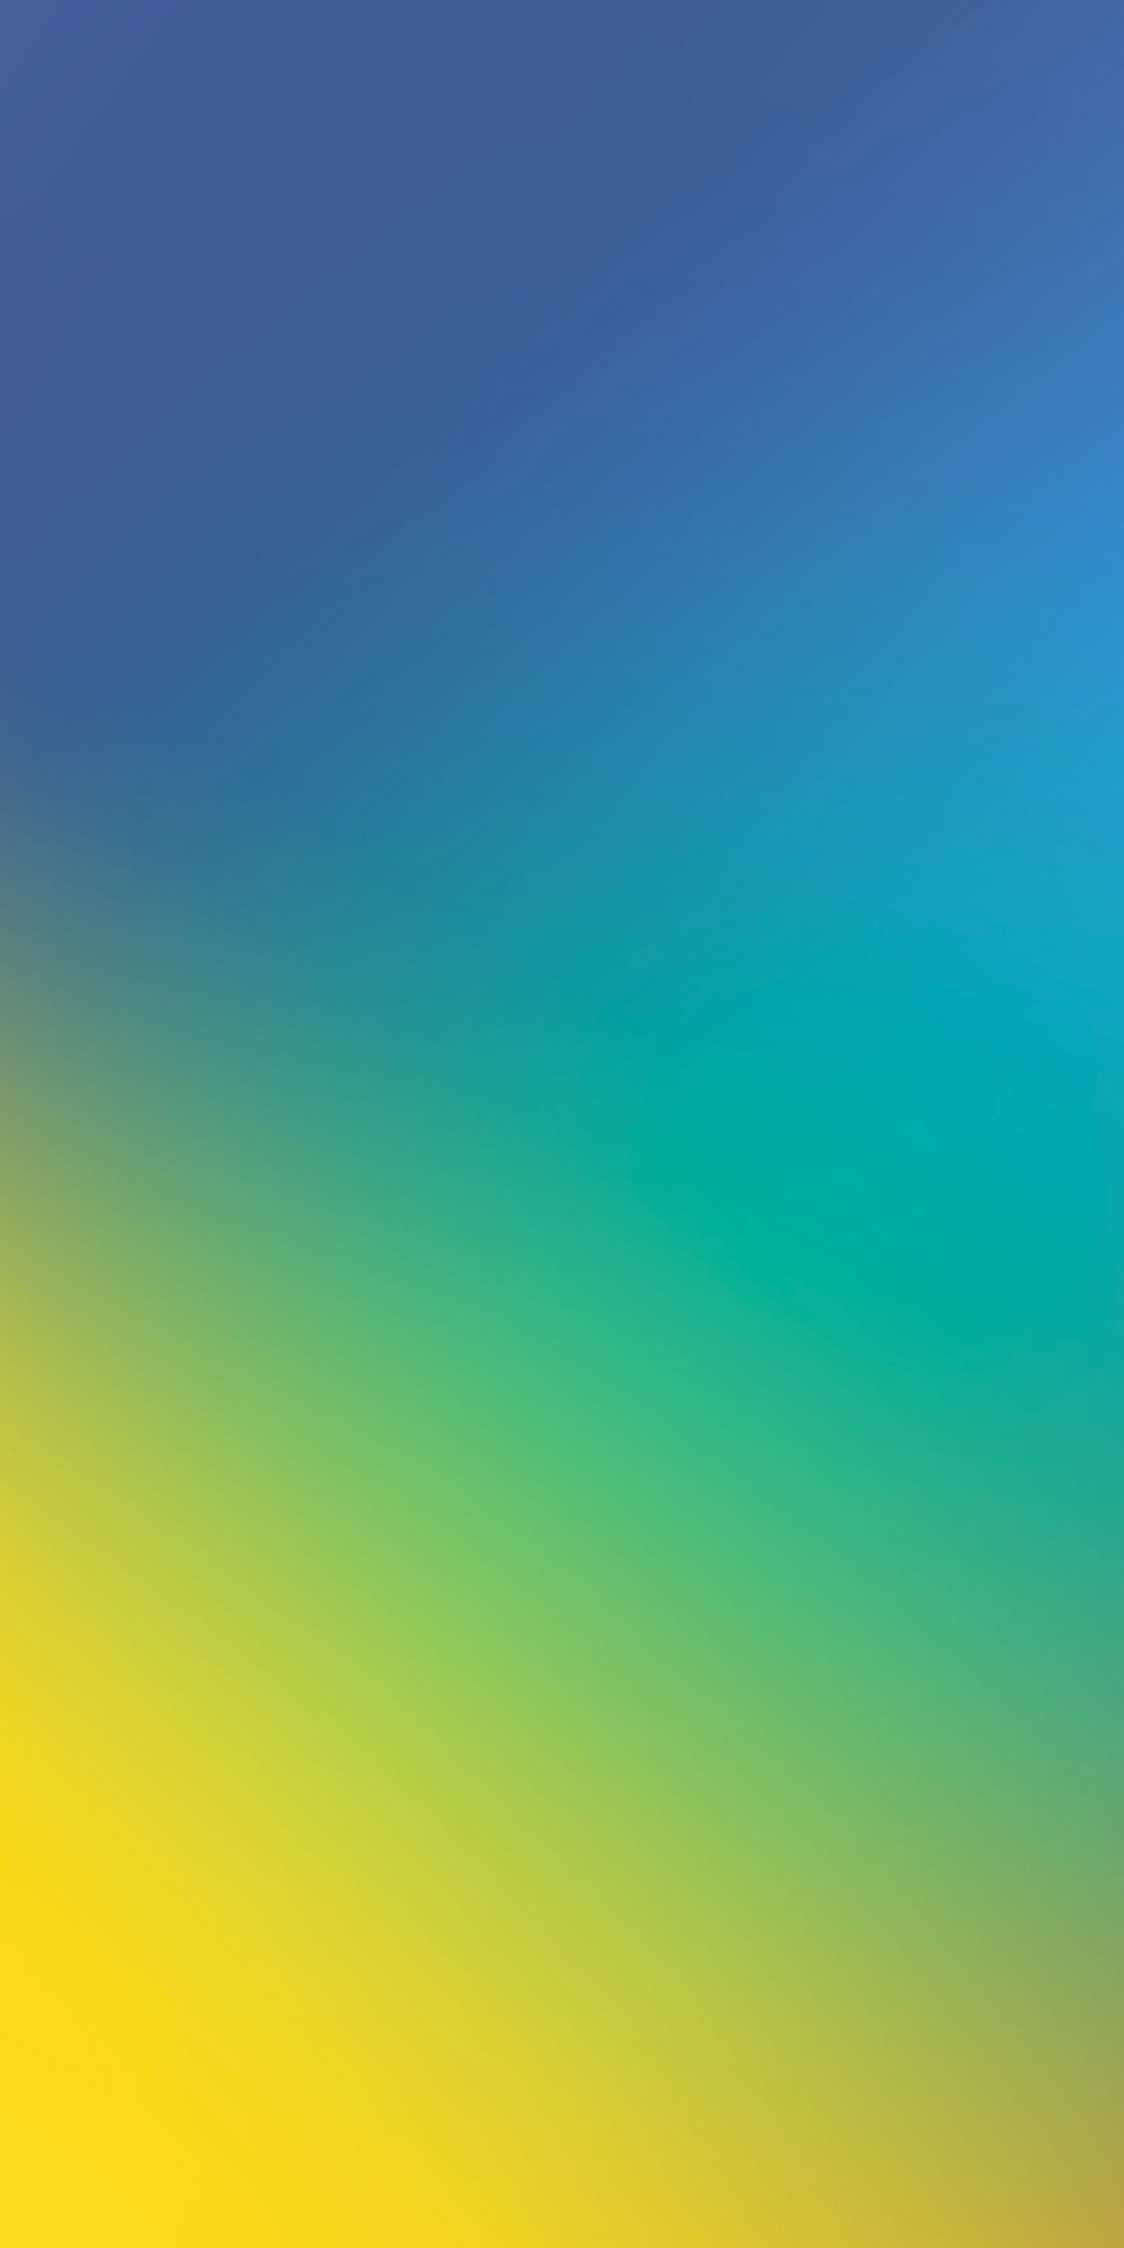 Blue and Yellow Gradient Background iPhone Wallpaper. iPhone wallpaper gradient, iPhone background, Samsung wallpaper